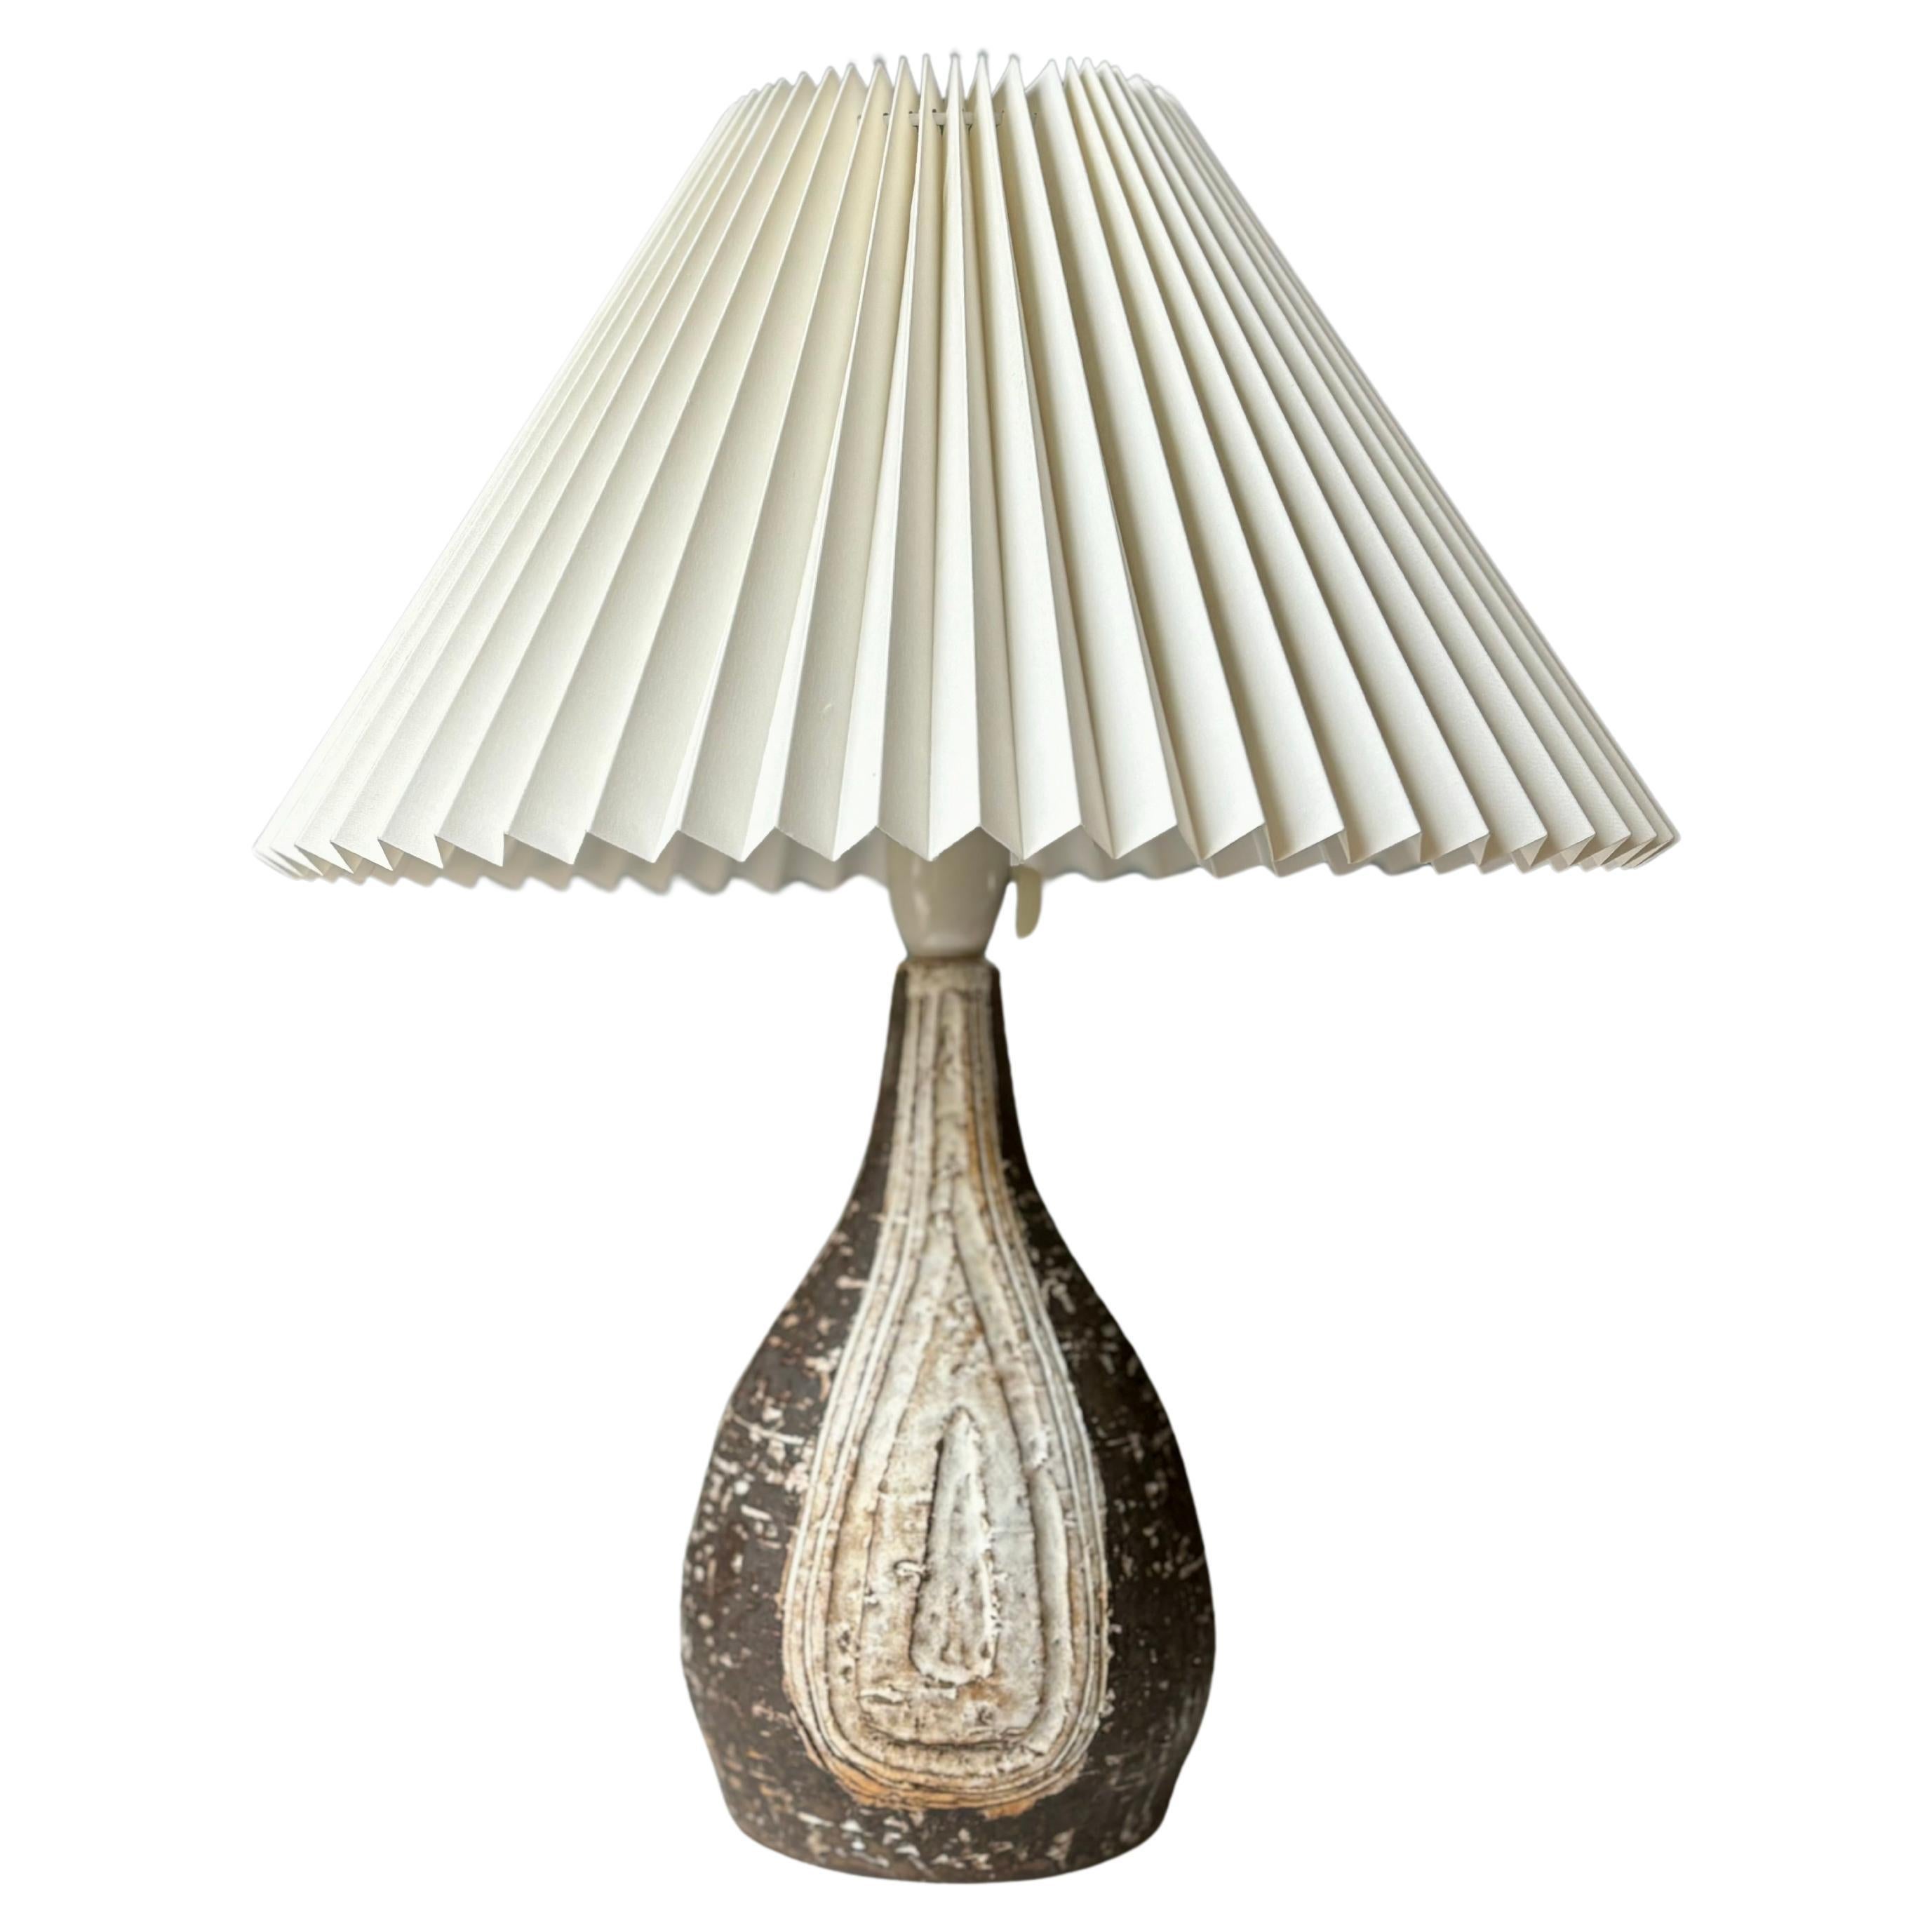 Sejer Danish Modern Stoneware Table Lamp, 1960s For Sale